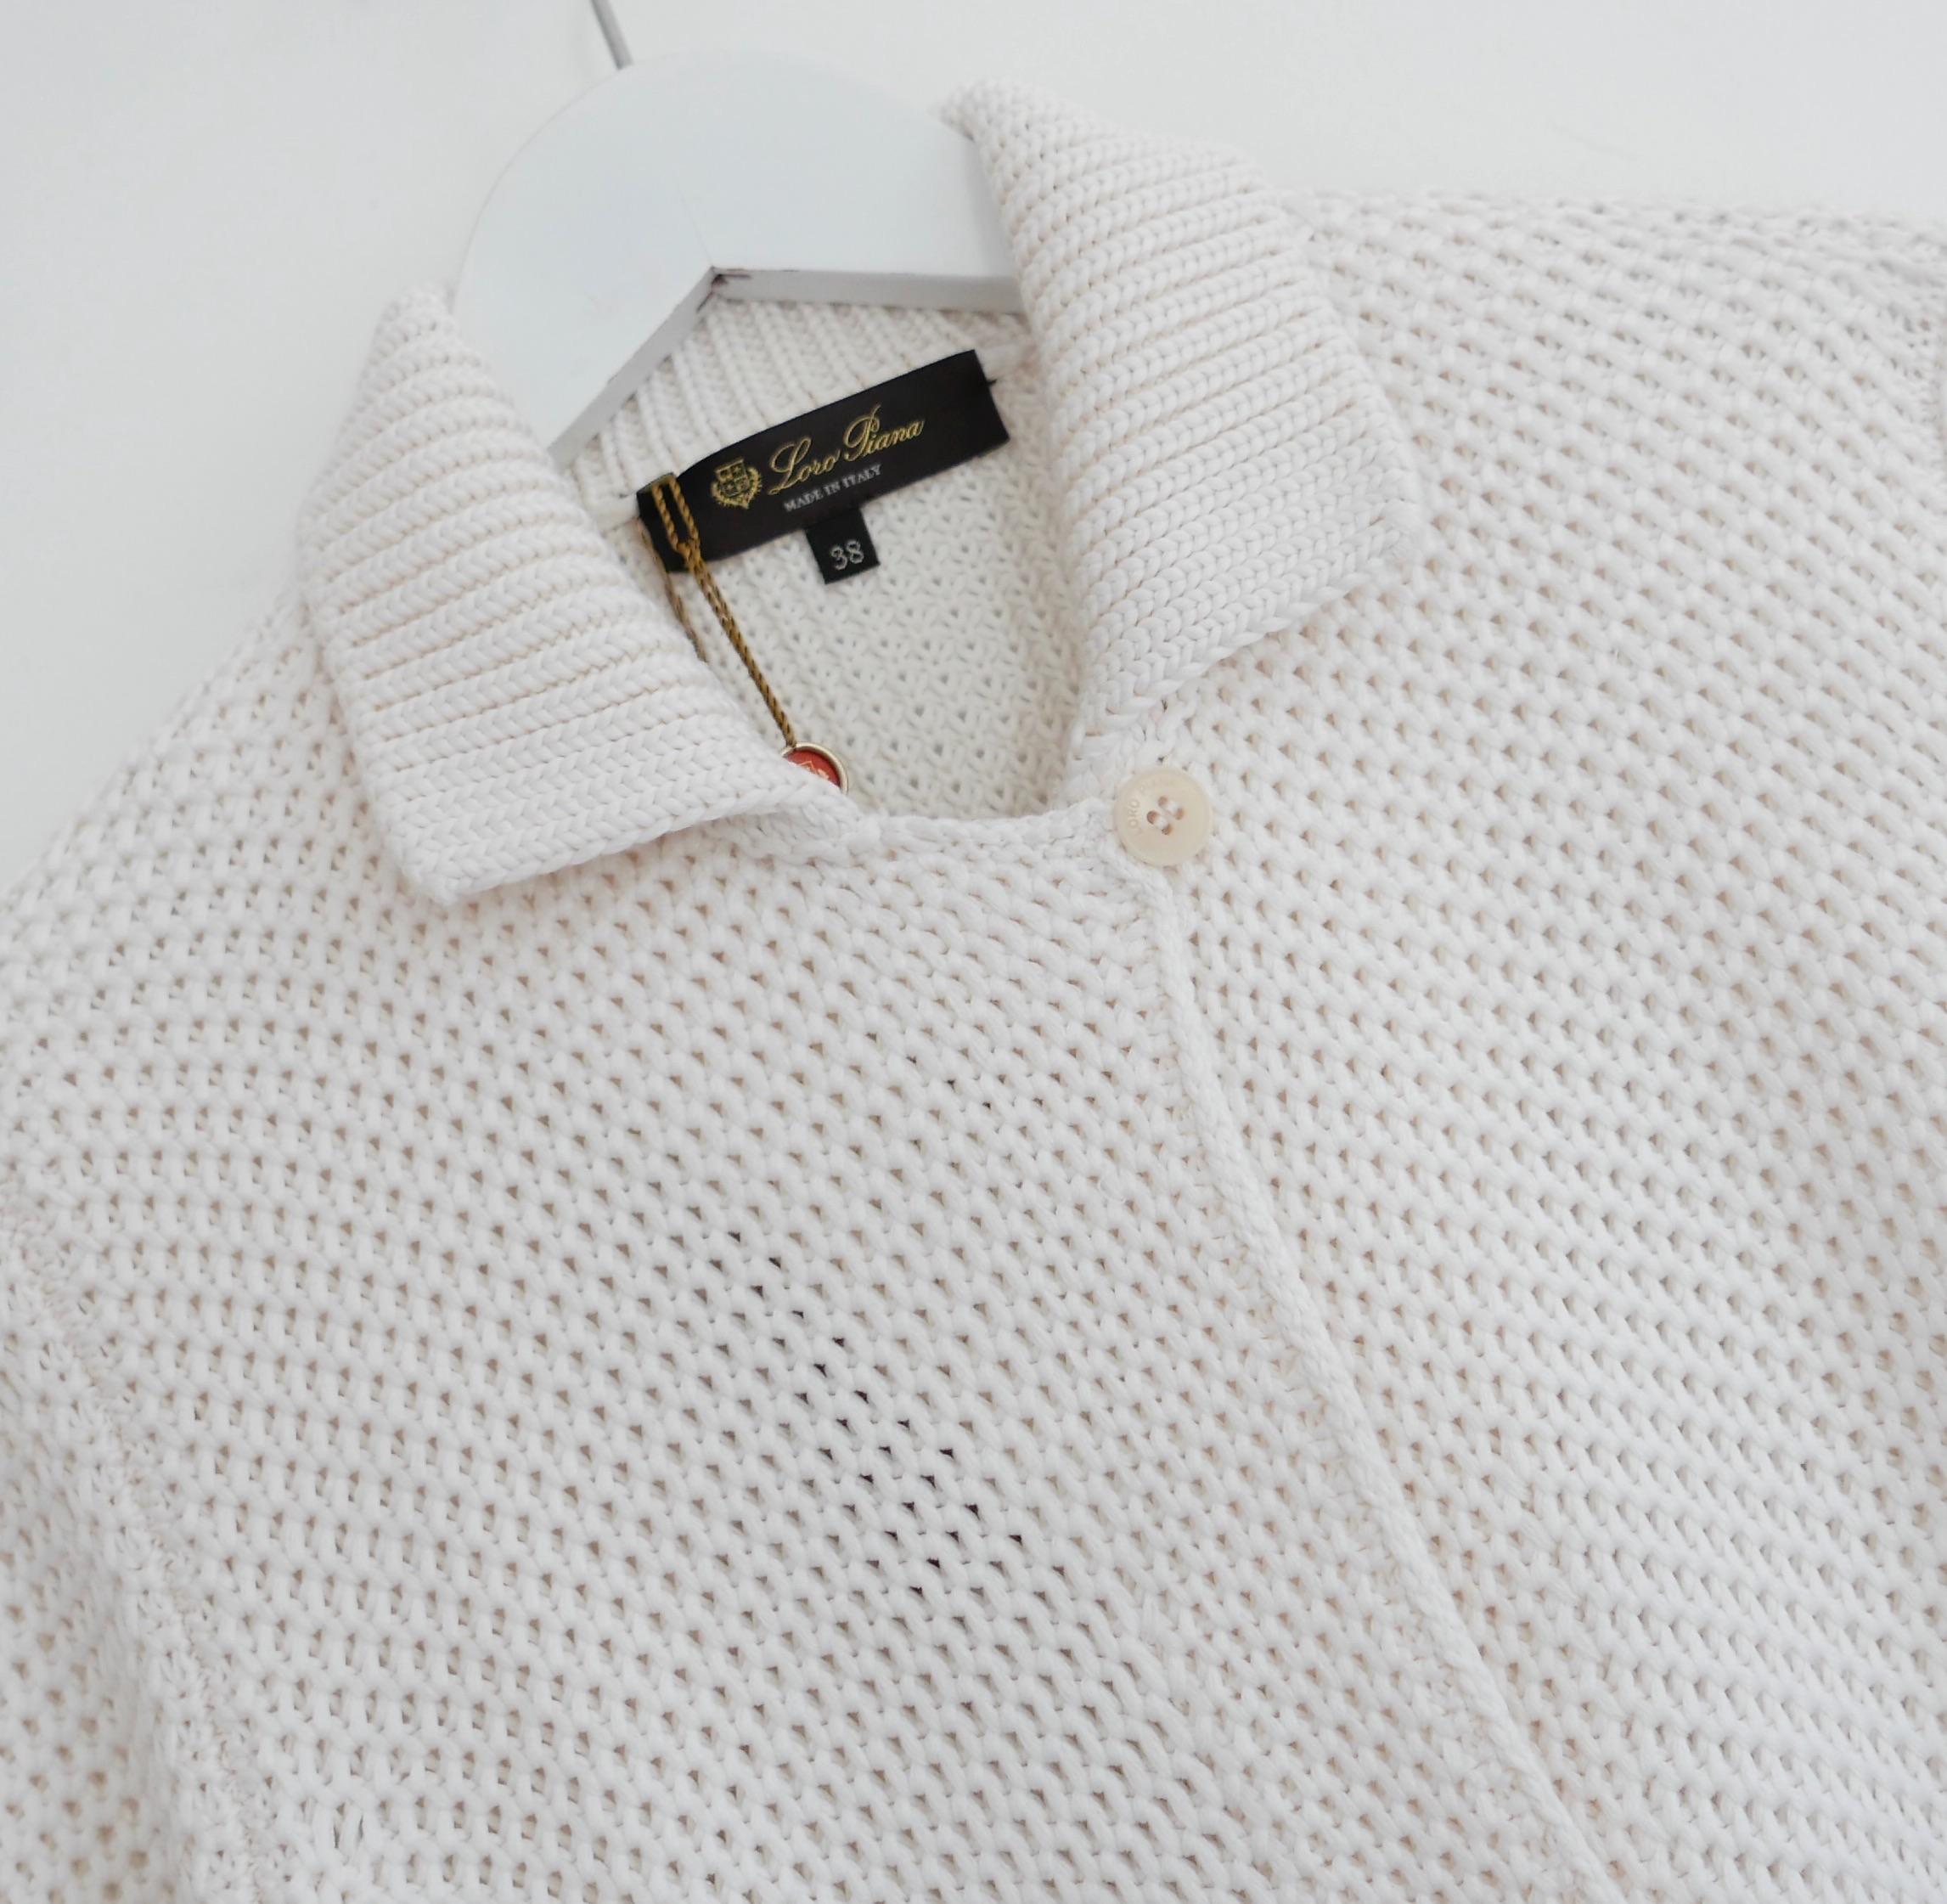 Divine Loro Piana Santiago silk and cotton-blend cardigan. Bought for £1950 and new with tag/spare button. Made from incredibly soft cream layered waffle knit silk and cotton, it has ribbed trims, patch pockets and large mother of pearl buttons.